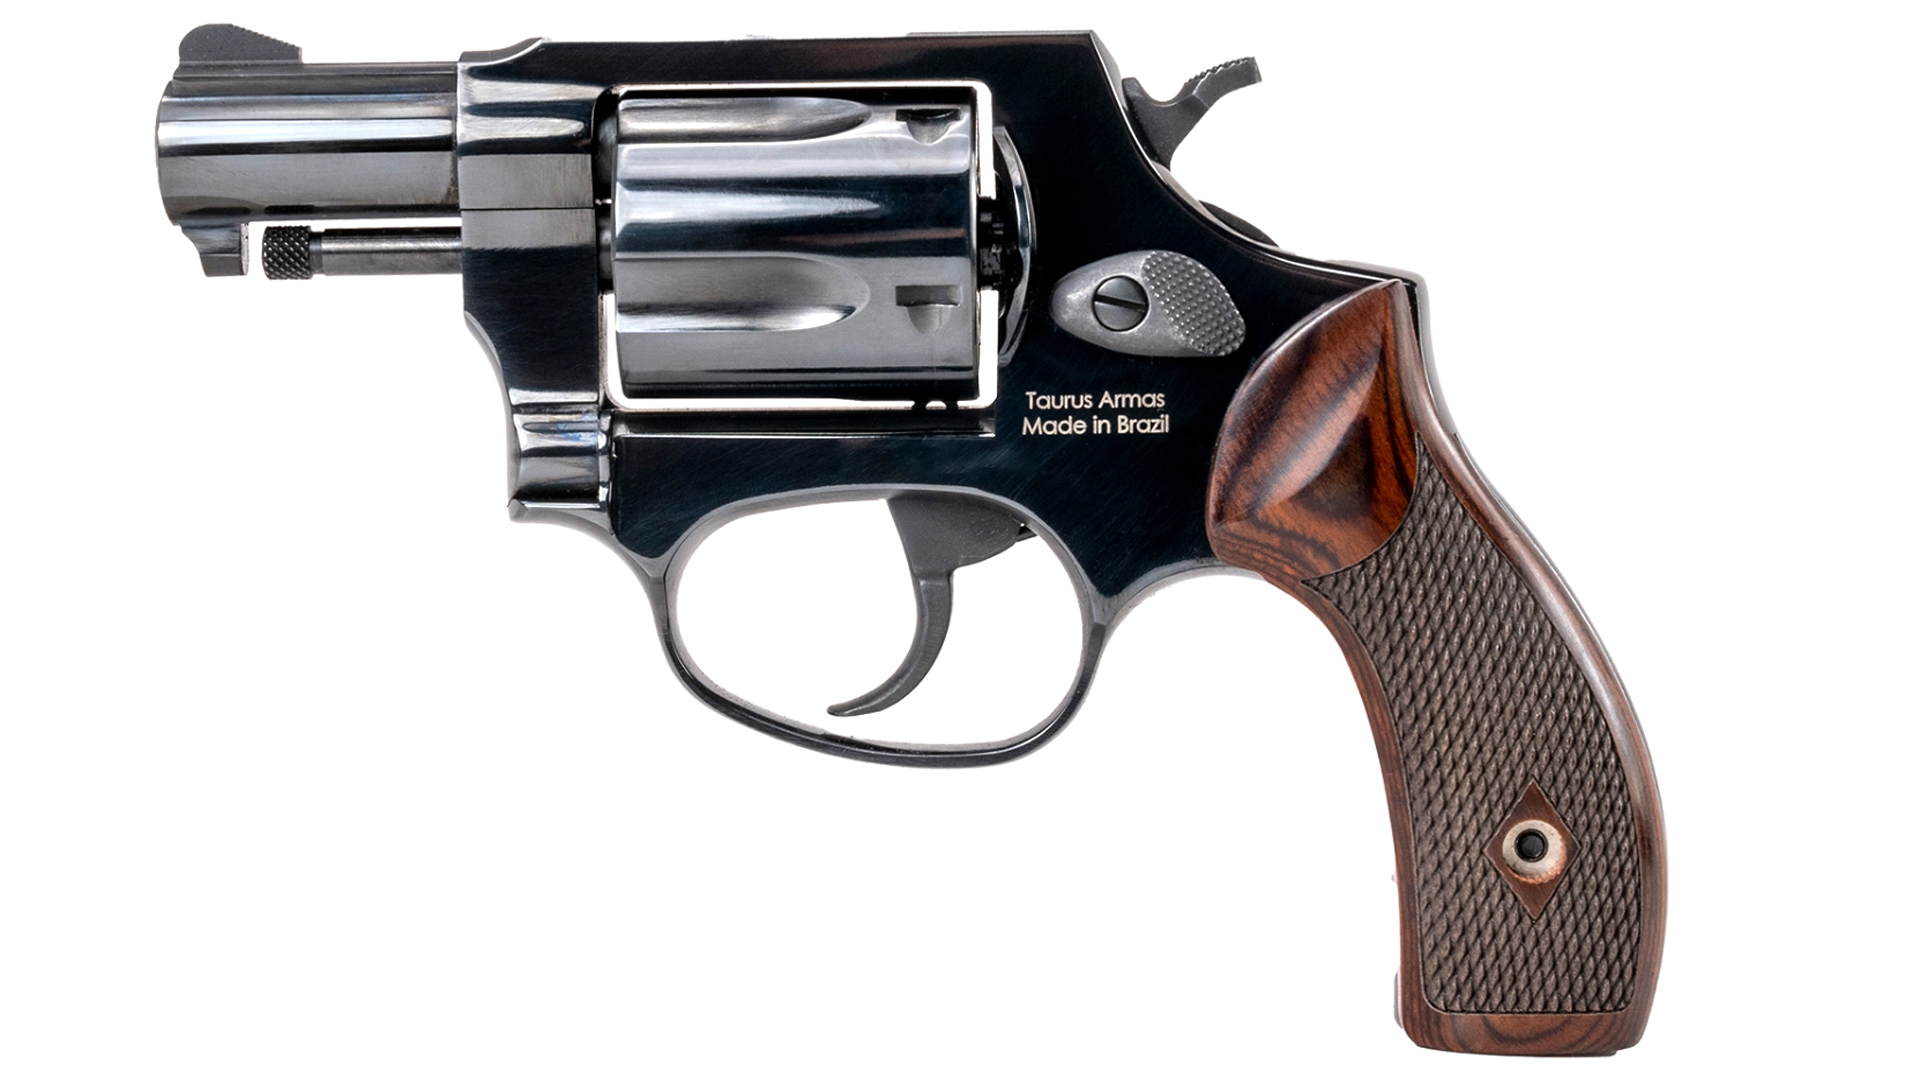 Left side view of the Heritage Mfg. Roscoe revolver.